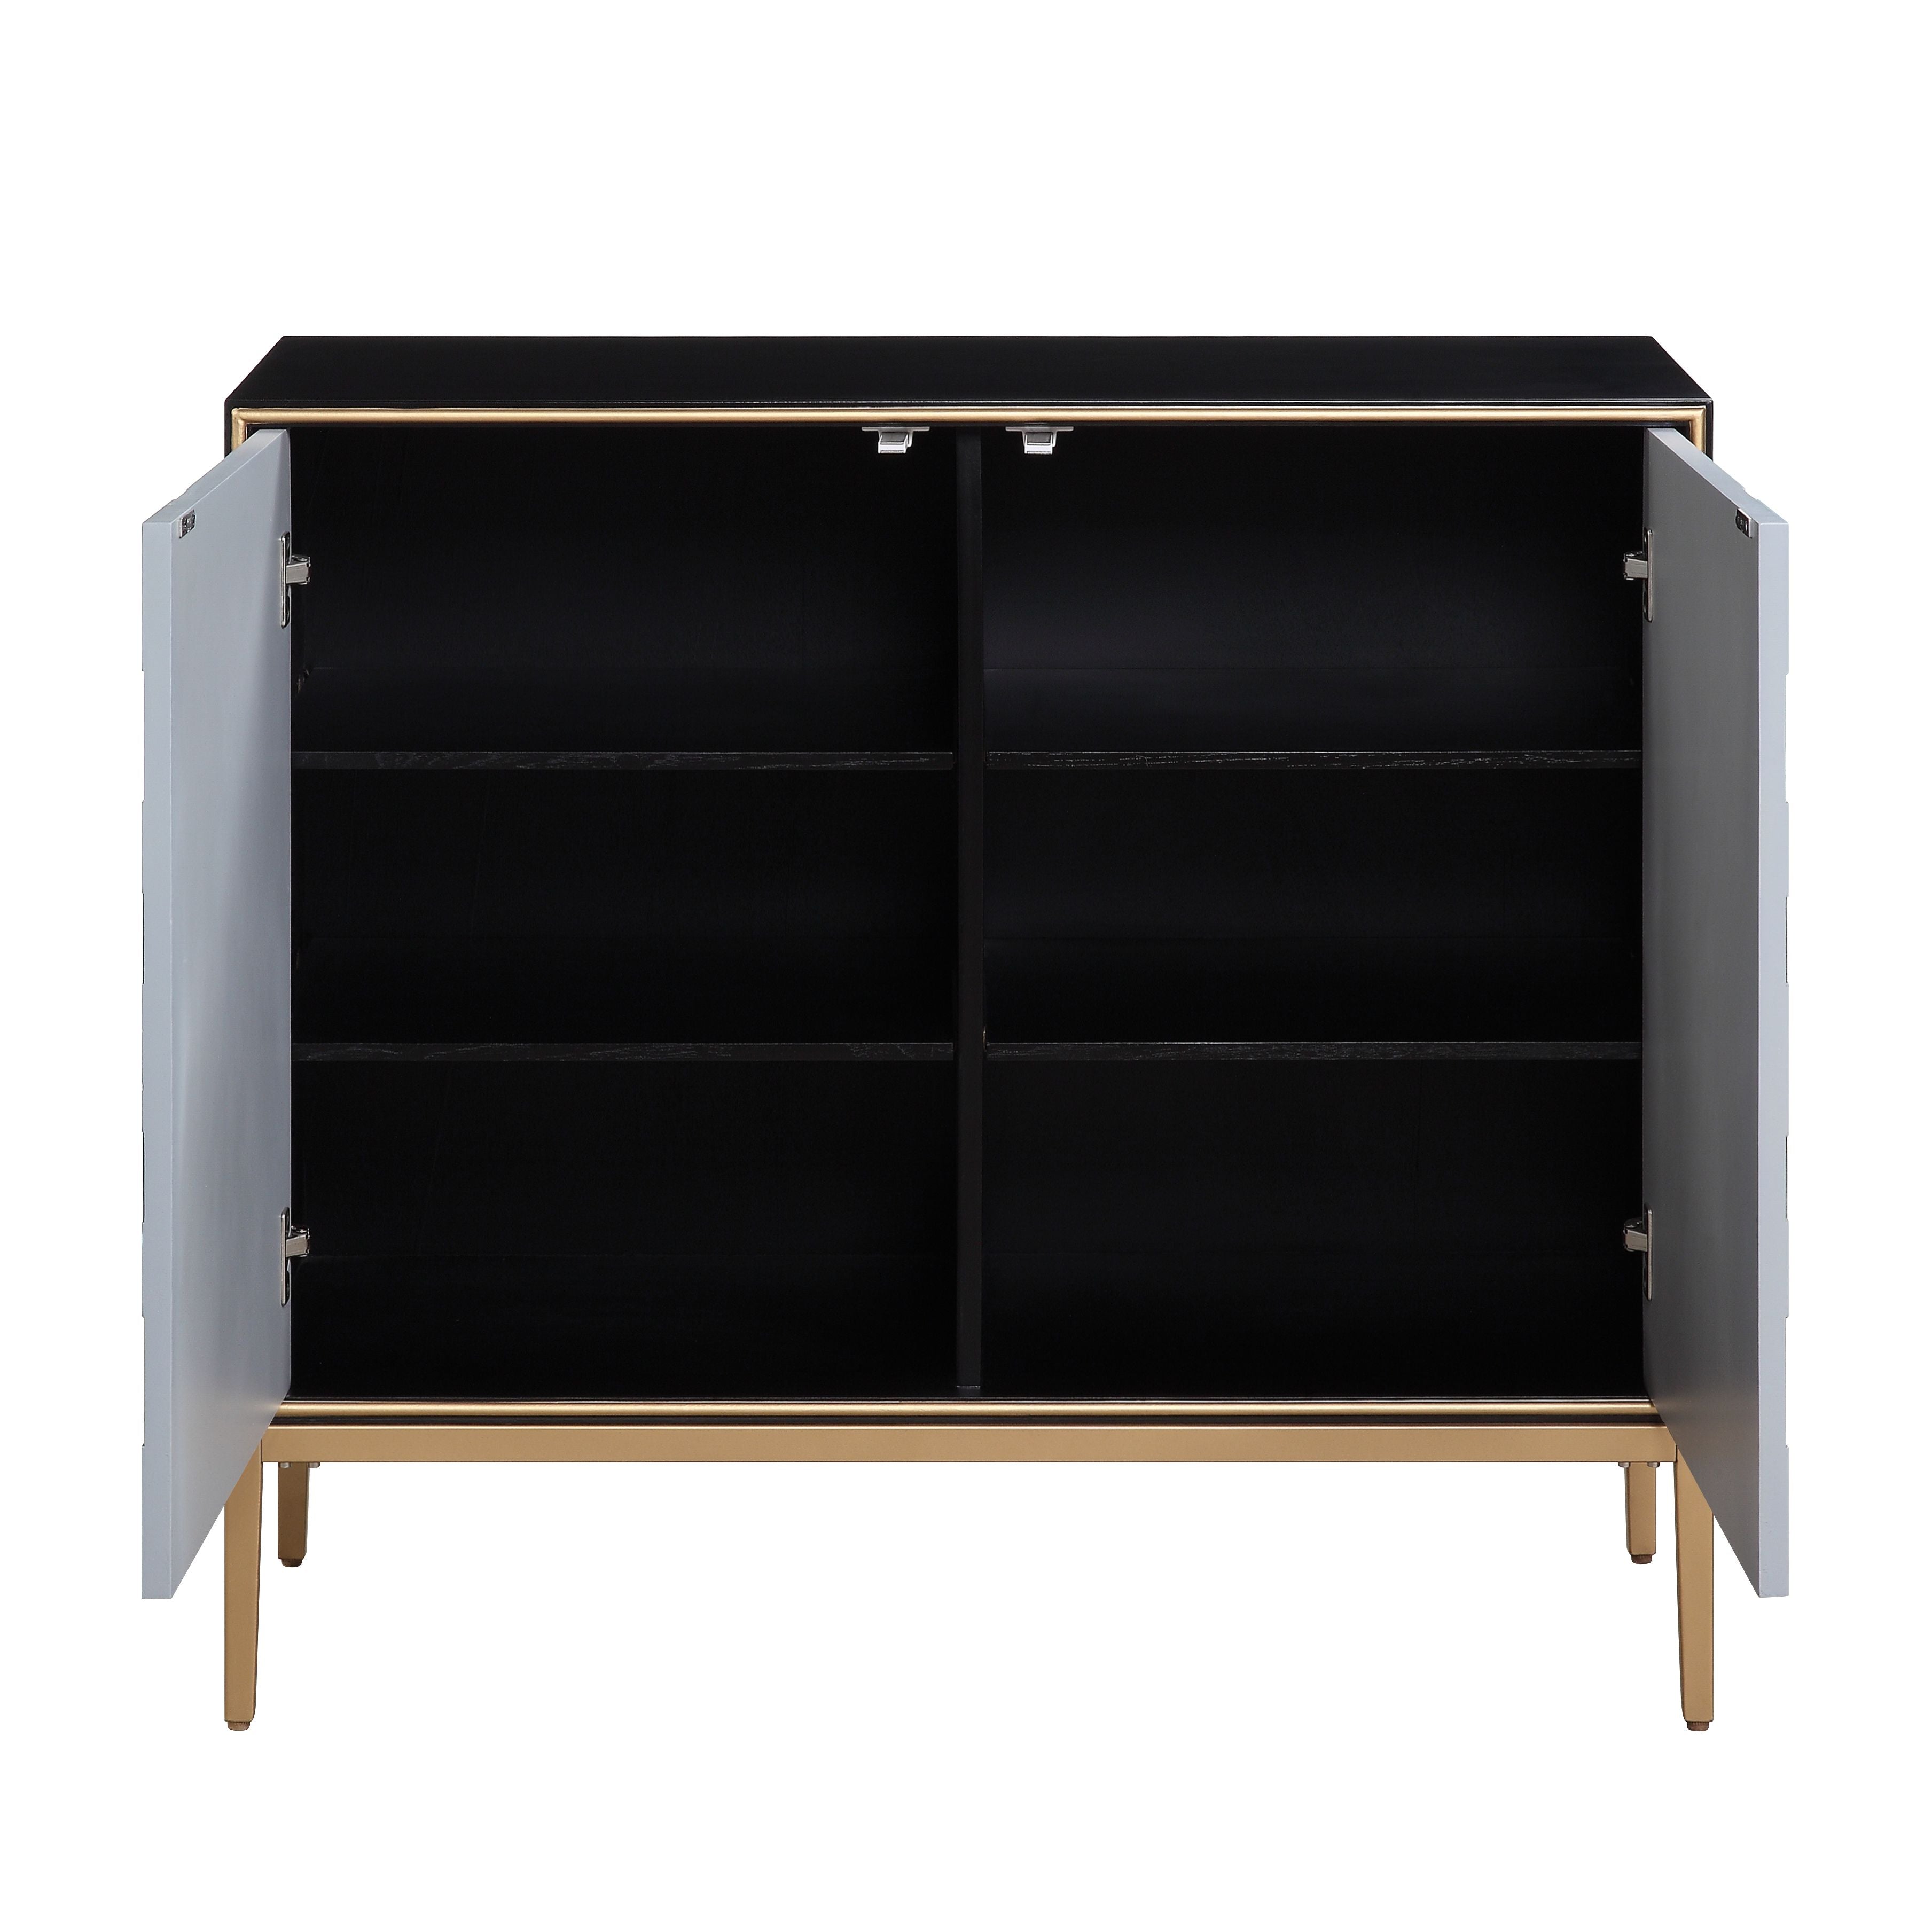 ACME Furniture Coffee Tables - ACME Quilla Console Table, Black, Gray & Brass Finish